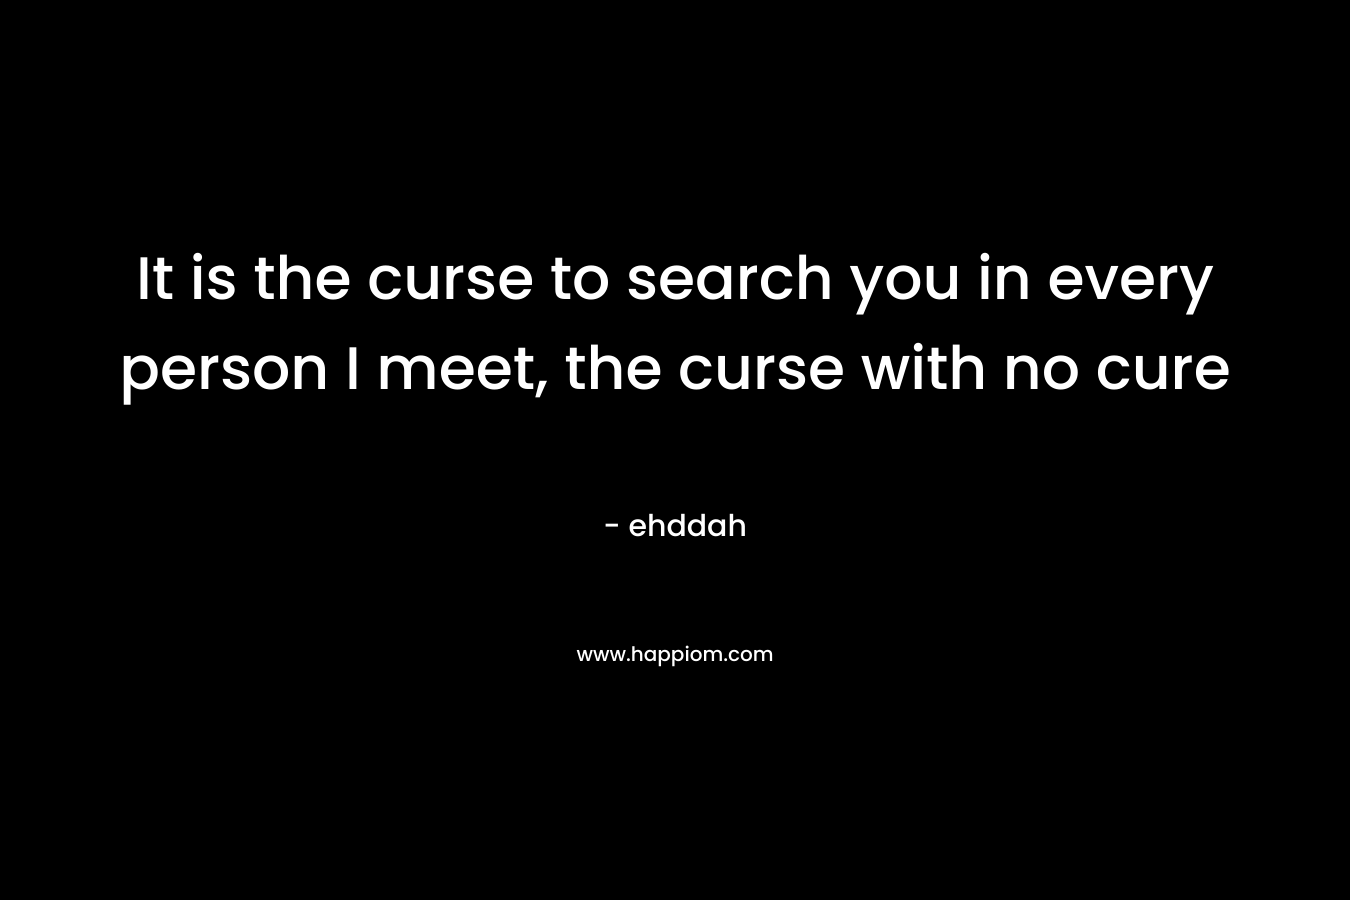 It is the curse to search you in every person I meet, the curse with no cure – ehddah